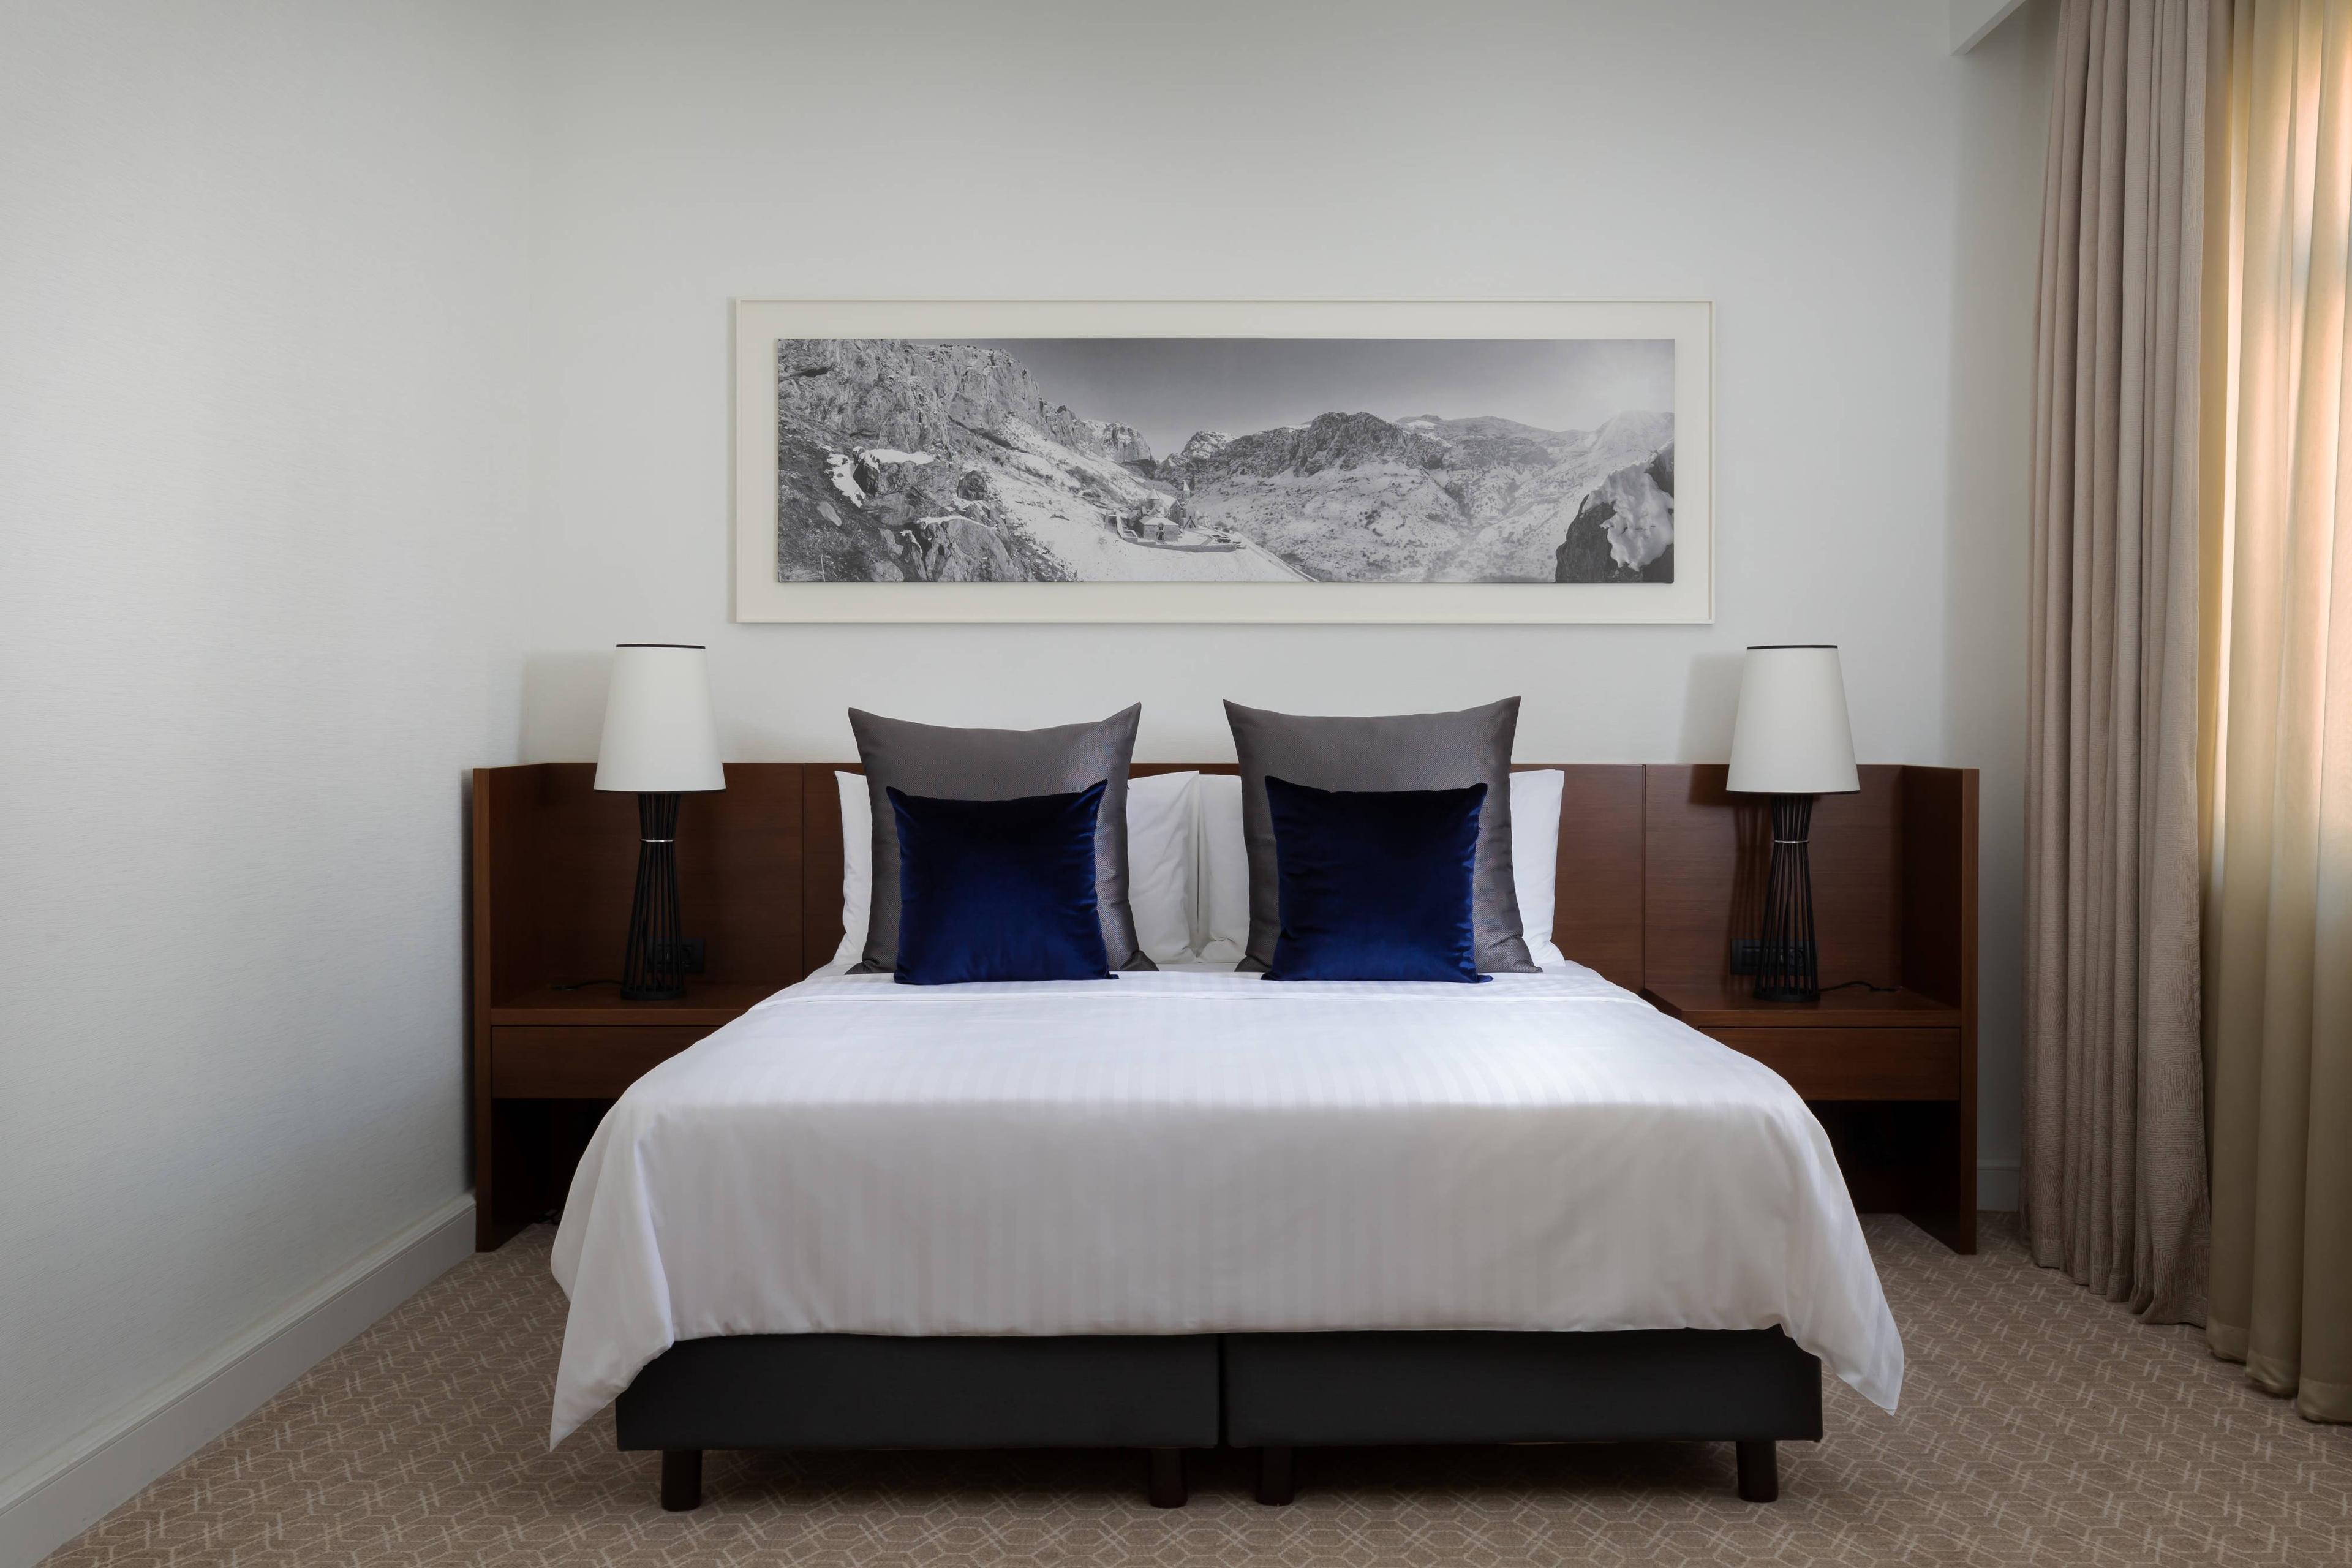 Enjoy the spacious accommodations of our guests rooms with a king-size bed.